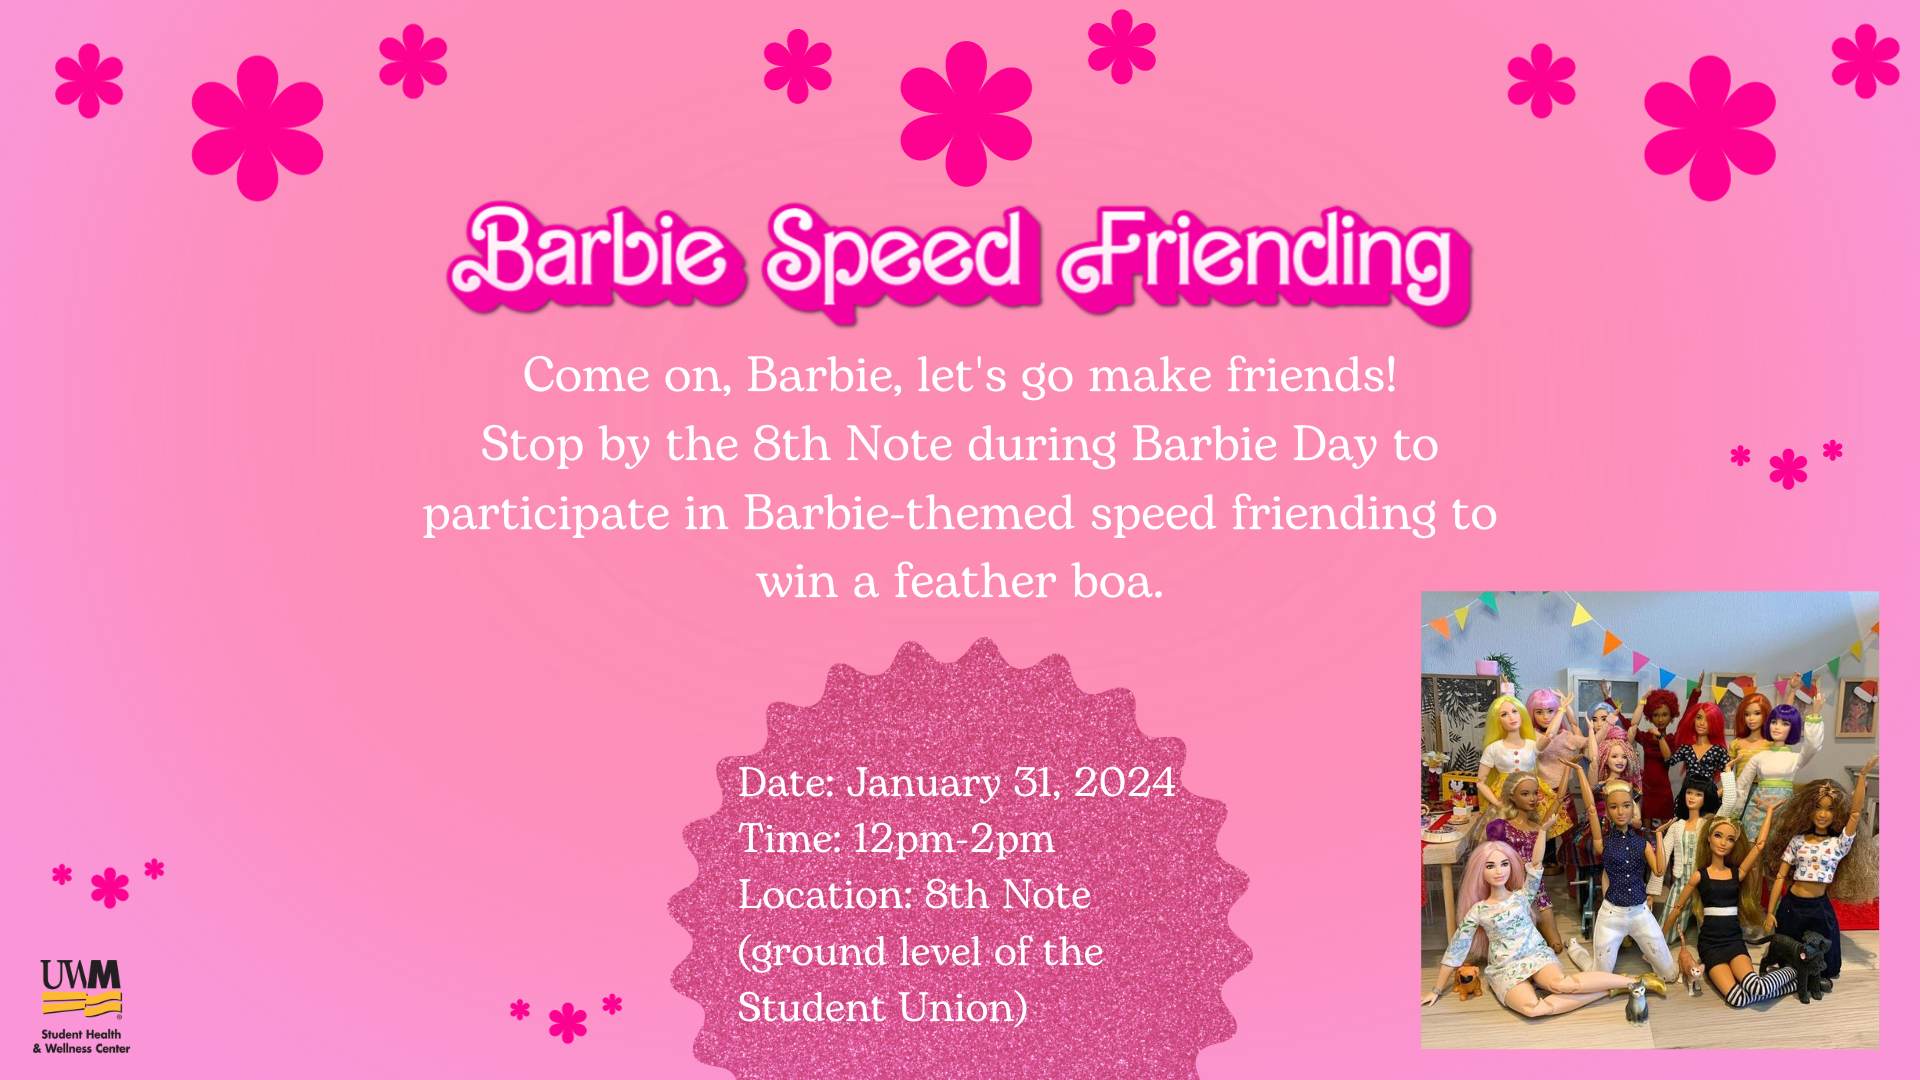 A barbie theme event aimed at helping students make friends in the Union